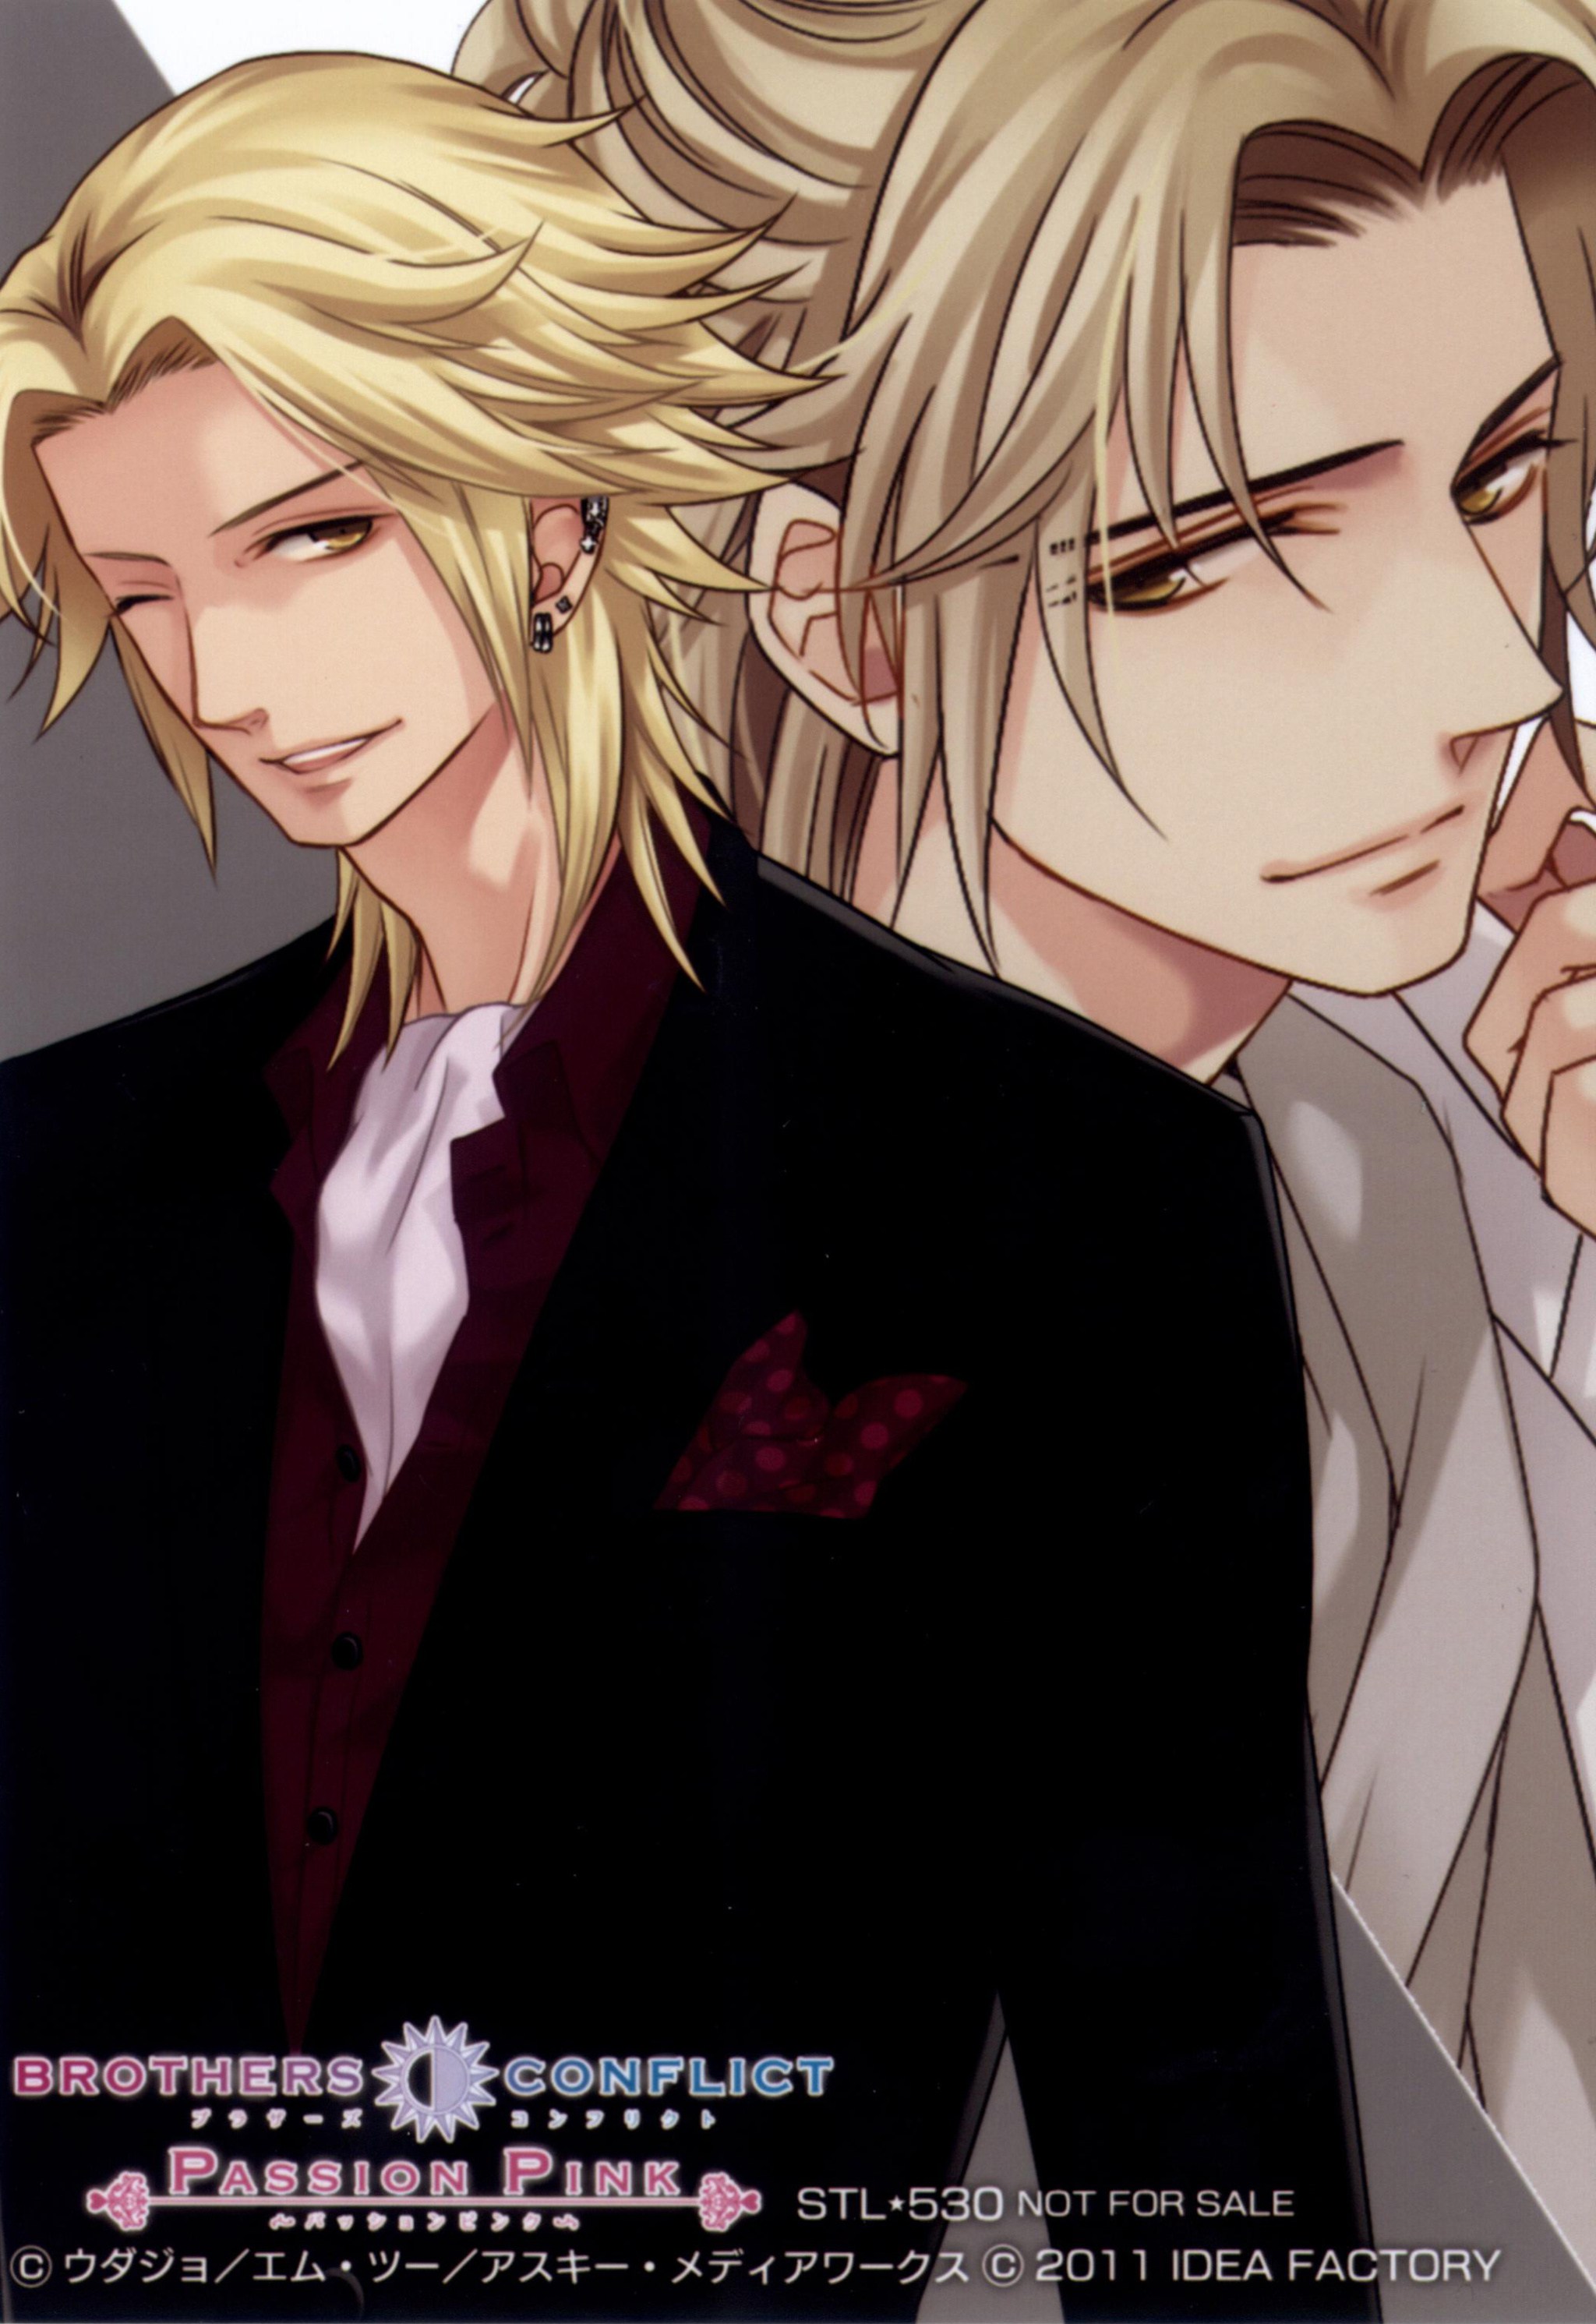 Asahina Kaname Brothers Conflict Mobile Wallpaper - Kaname Asahina Brothers Conflict , HD Wallpaper & Backgrounds